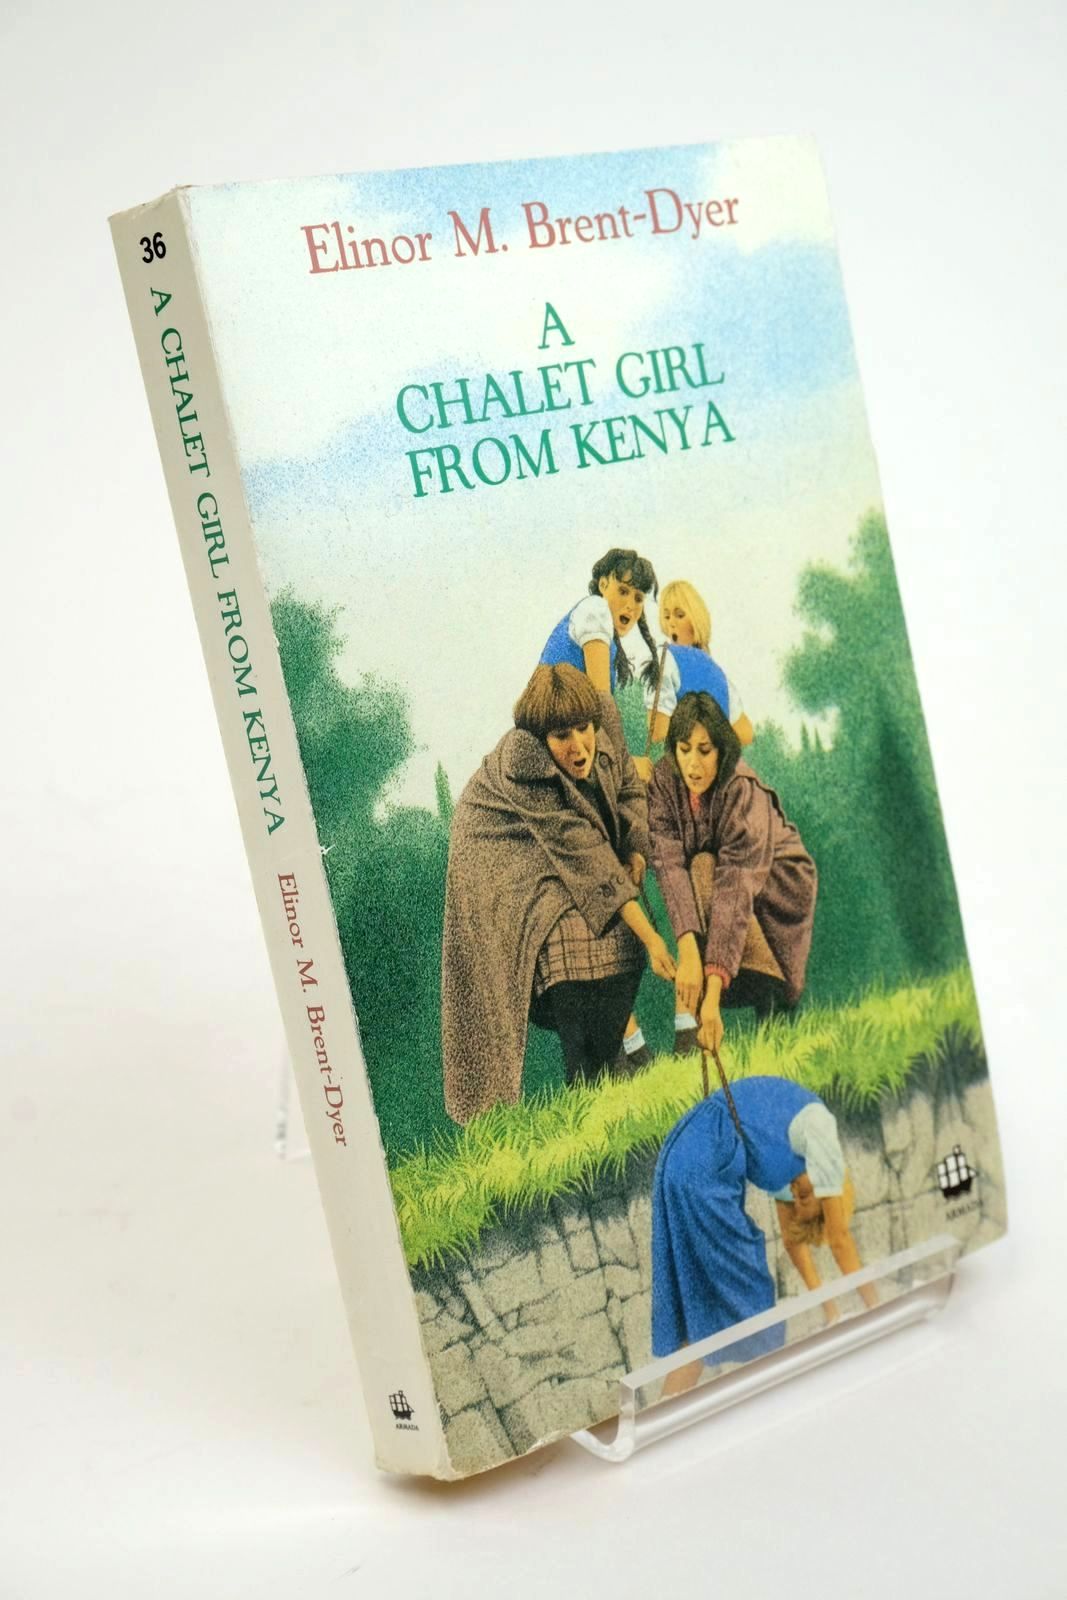 Photo of A CHALET GIRL FROM KENYA written by Brent-Dyer, Elinor M. published by Armada (STOCK CODE: 1321888)  for sale by Stella & Rose's Books